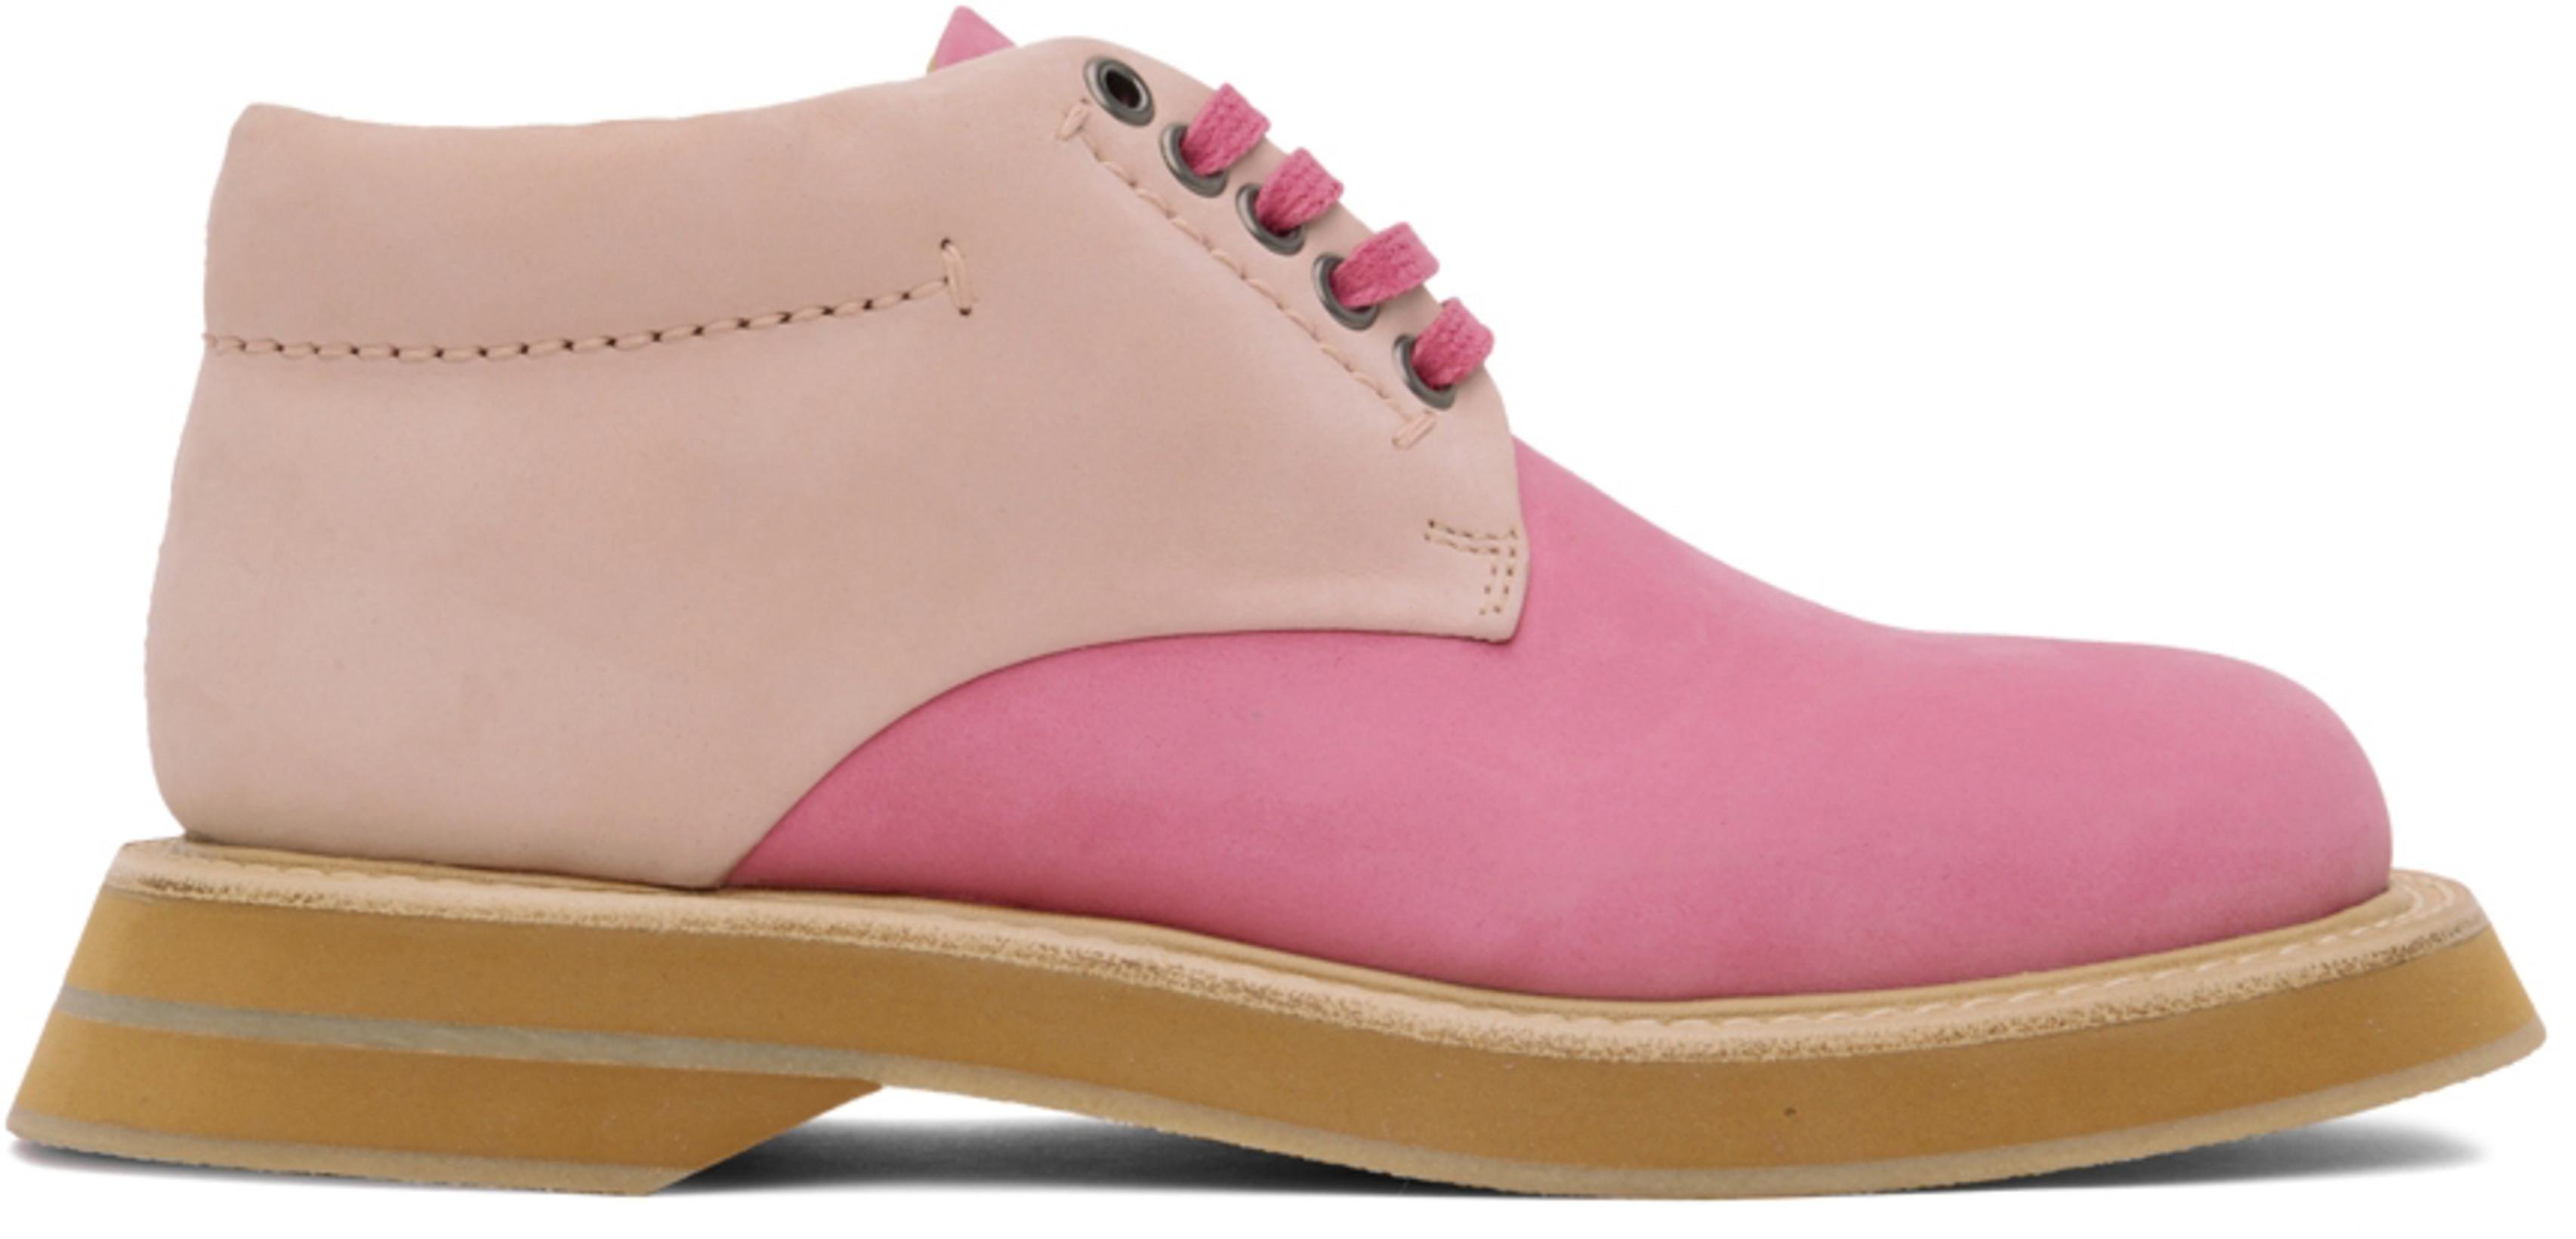 Pink 'Les Chaussures Bricolo' Lace-Up Work Boots by JACQUEMUS